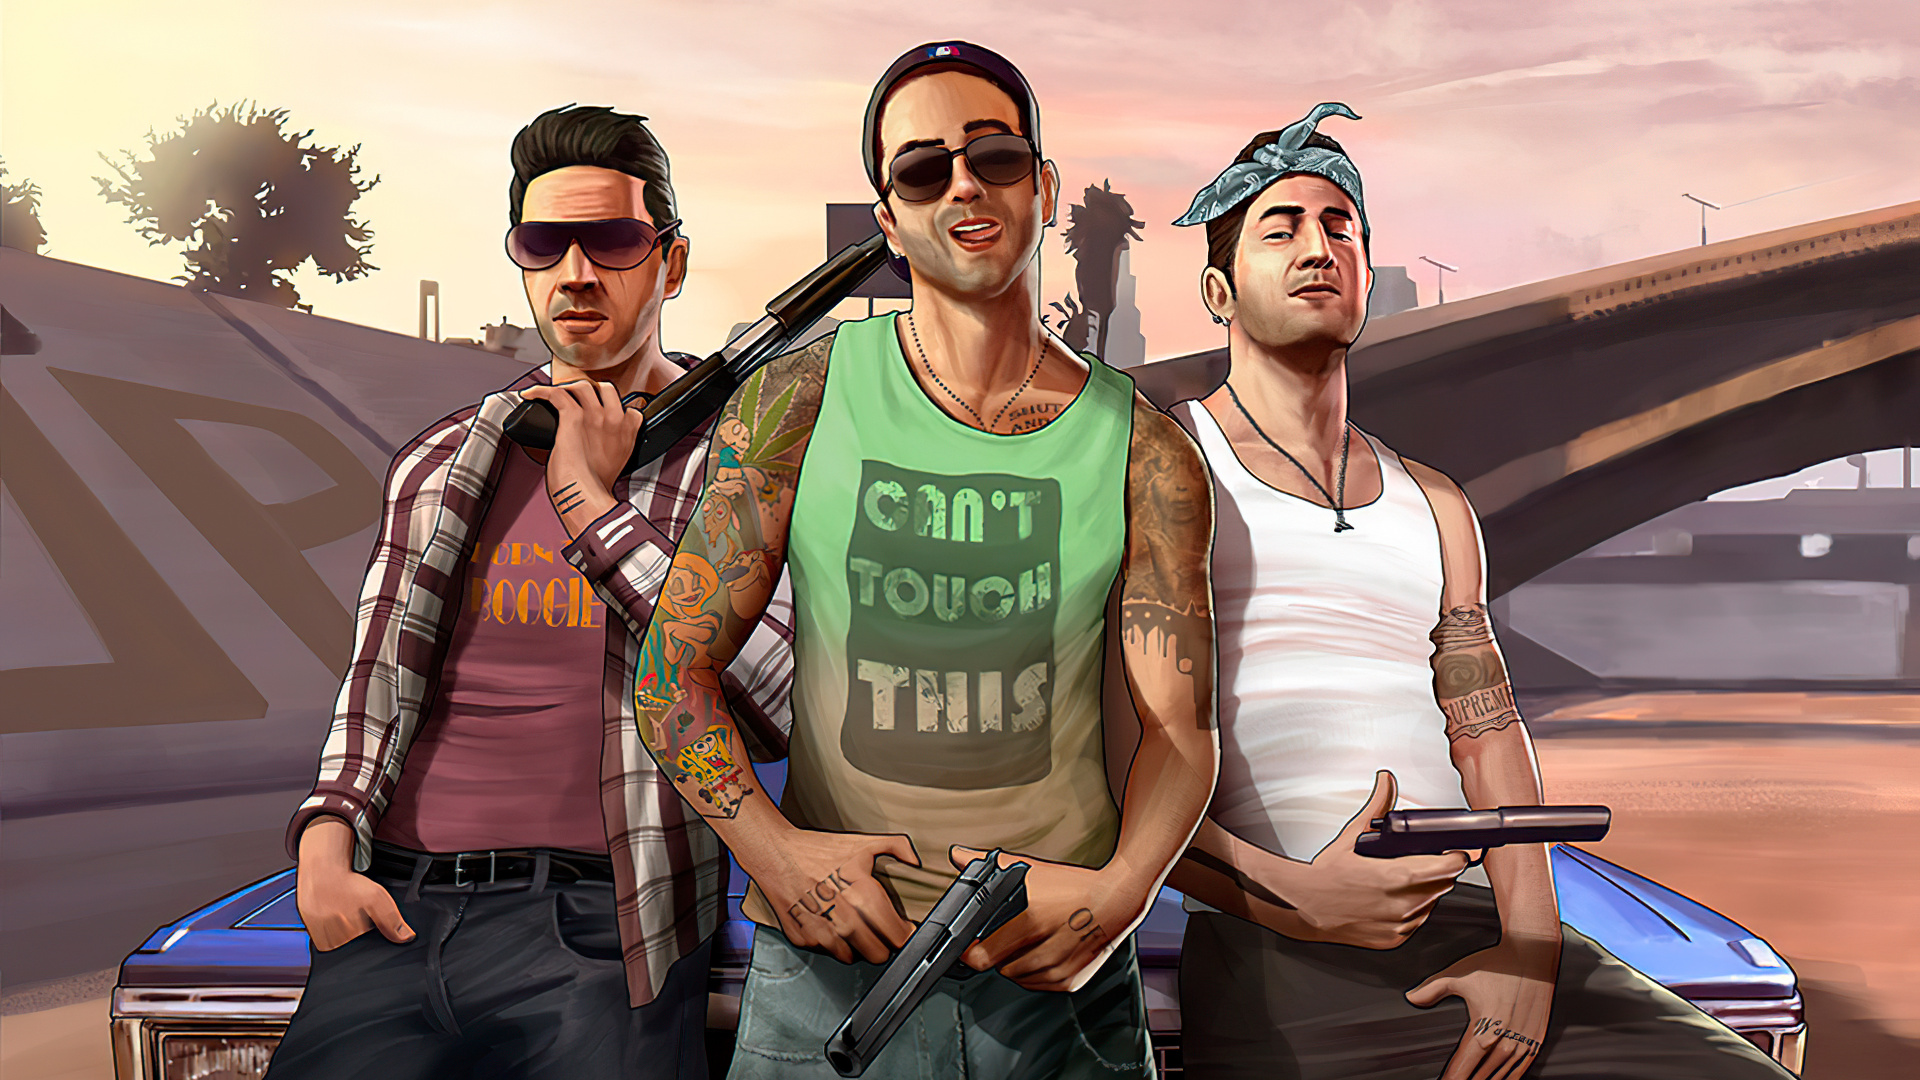 Chillin With The Homies, Grand Theft Auto v, Rockstar Games, Human, Eyewear. Wallpaper in 1920x1080 Resolution